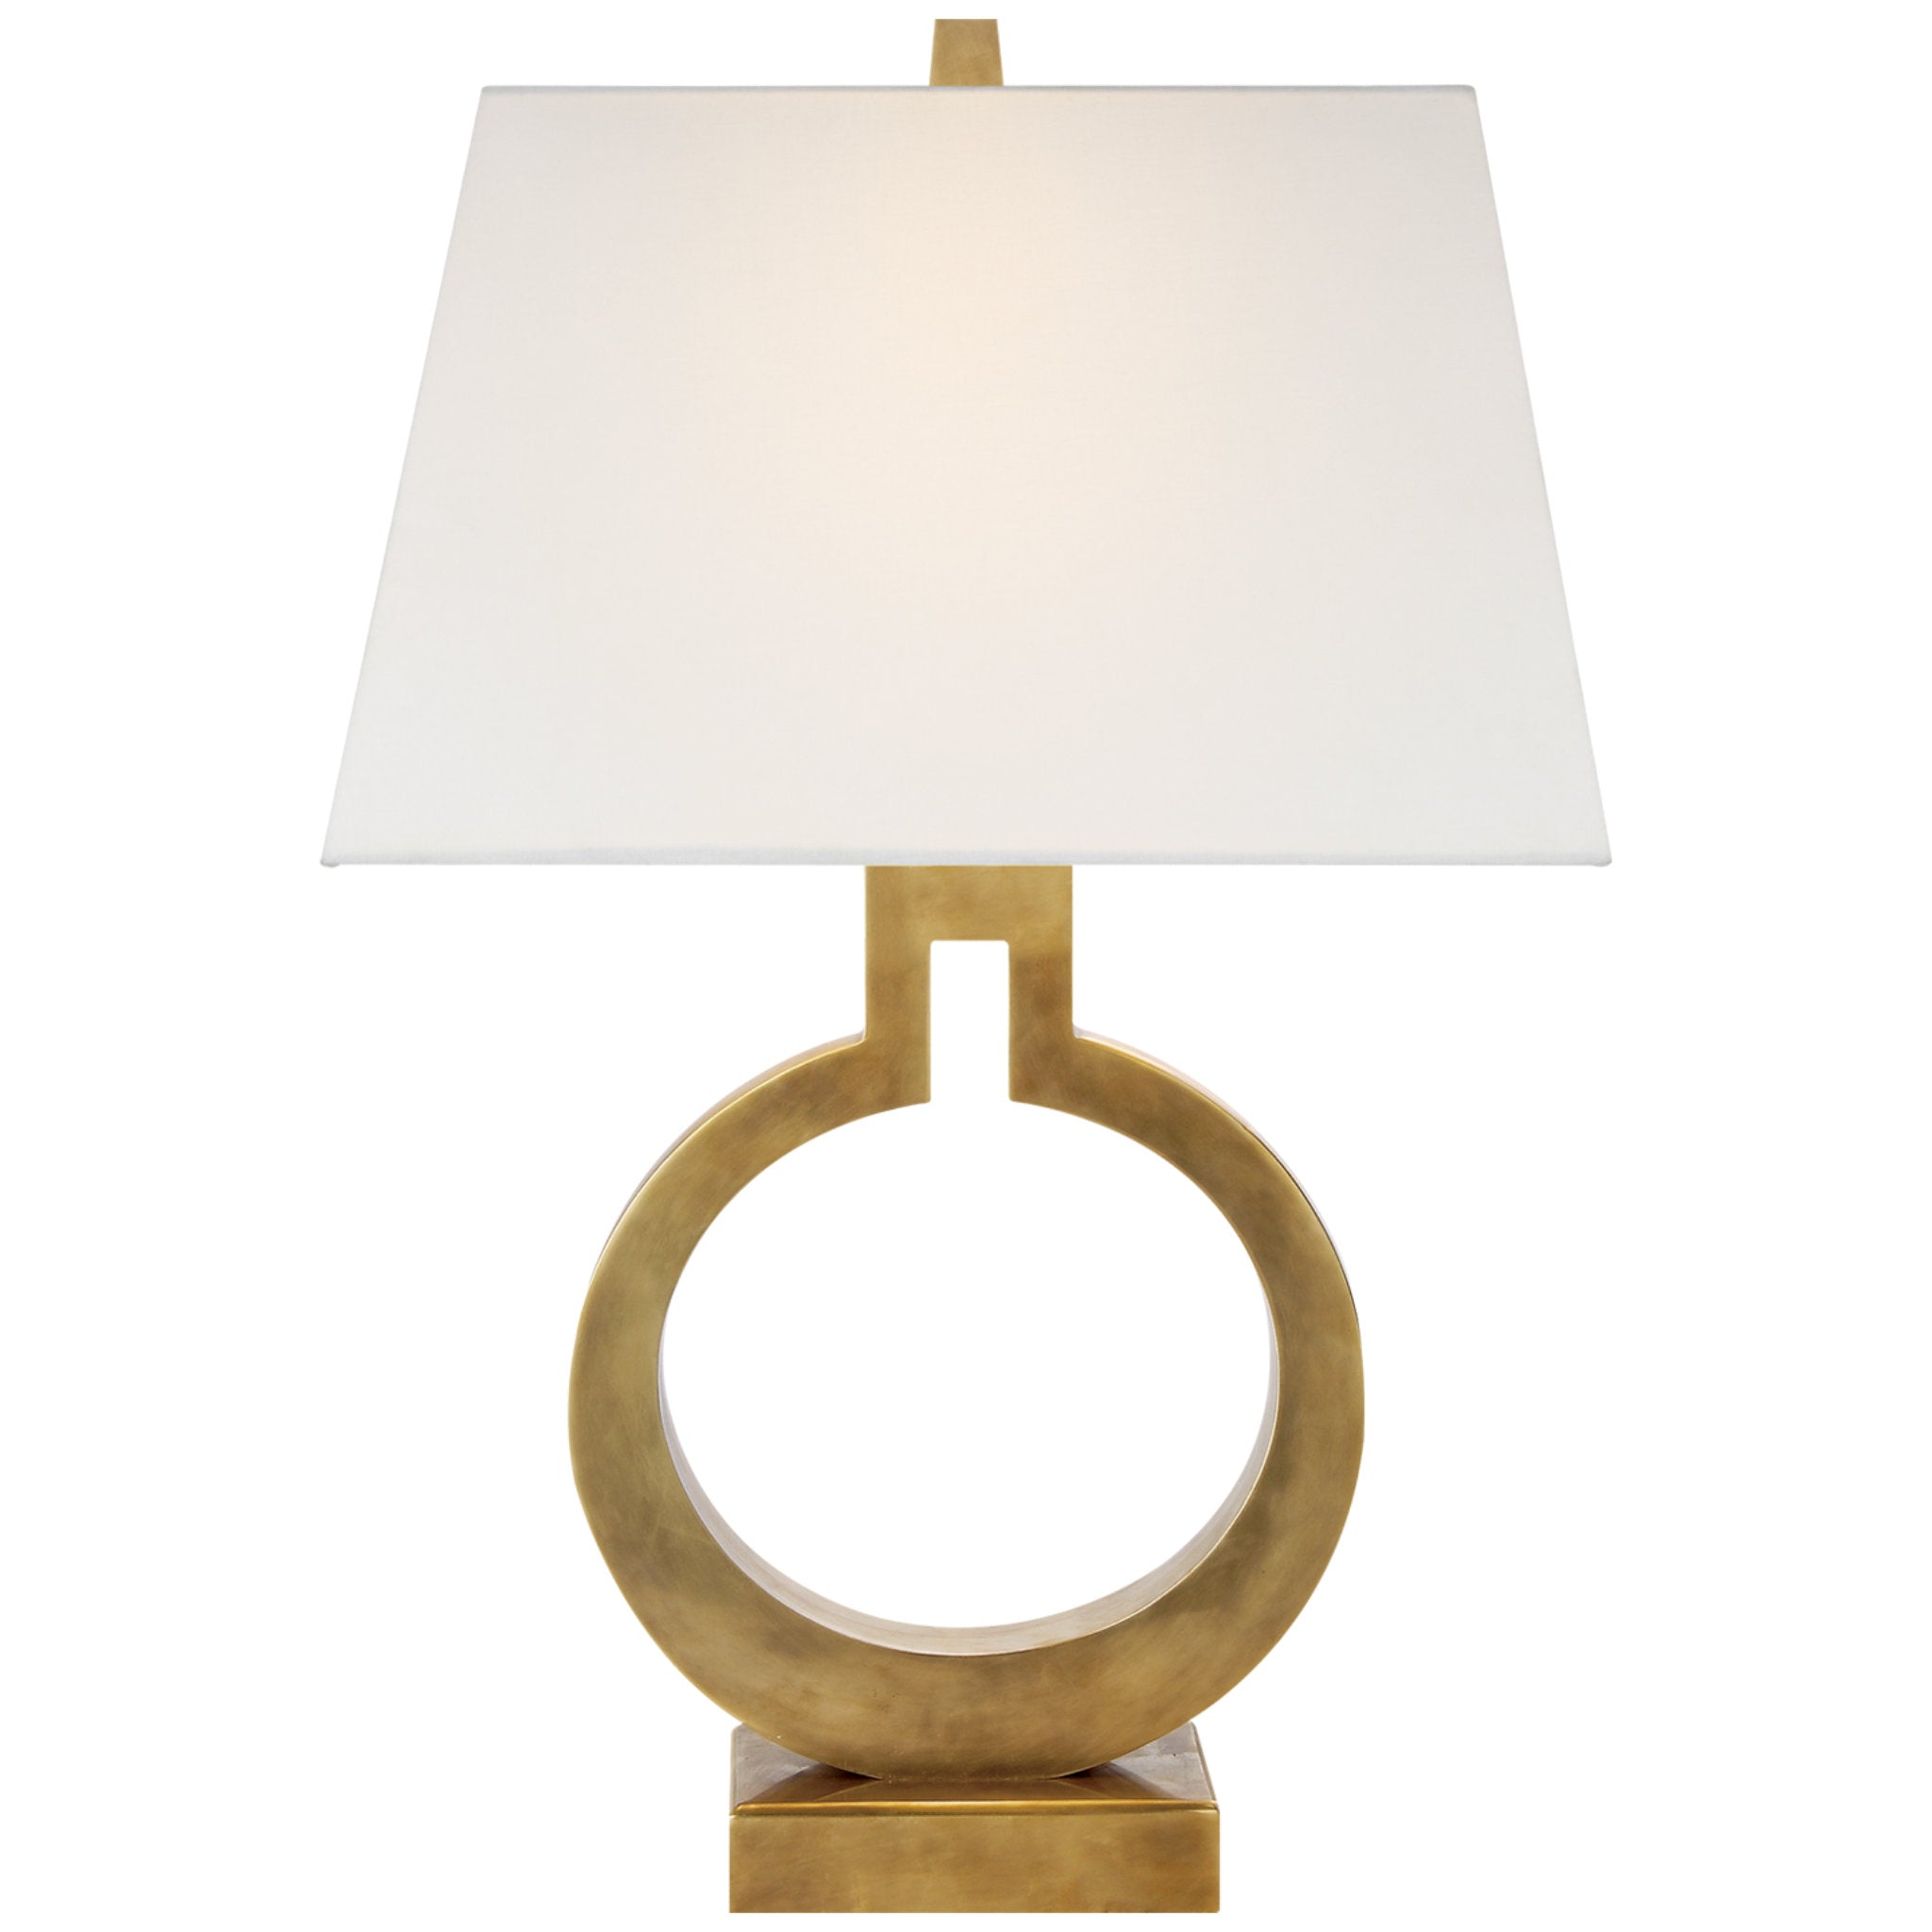 Chapman & Myers Ring Form Small Table Lamp in Antique-Burnished Brass with Linen Shade